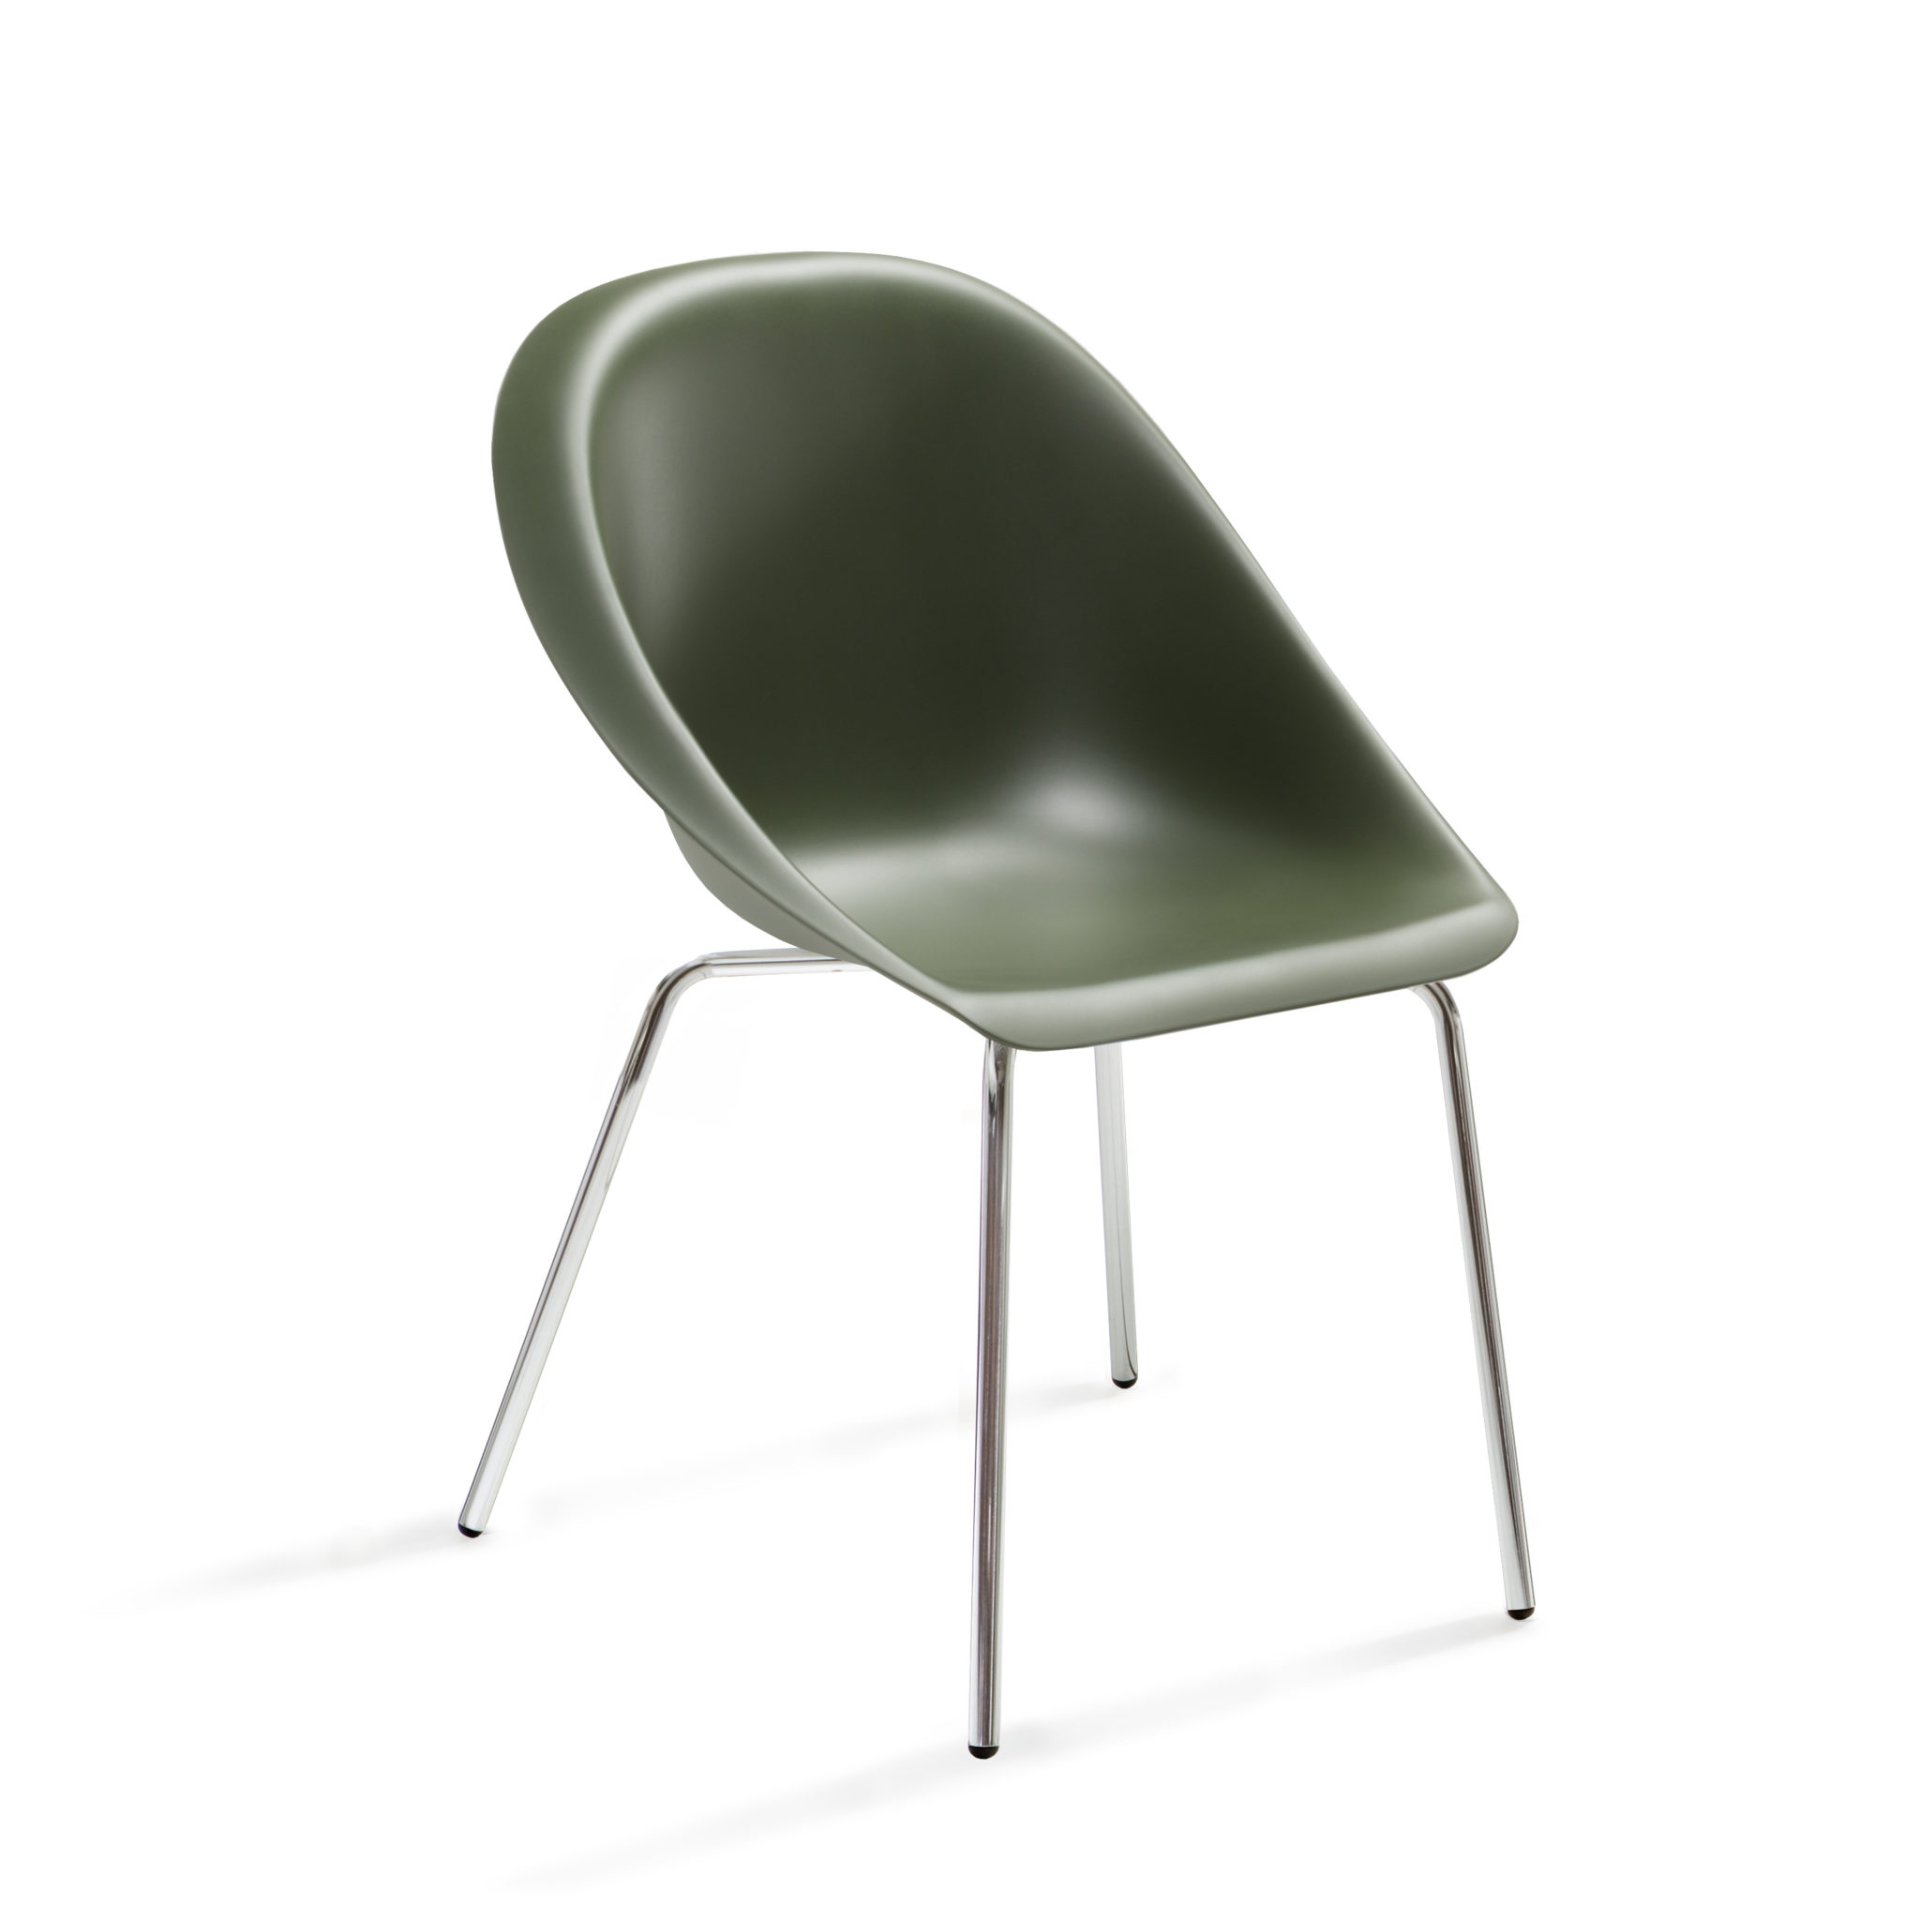 chrome structure - olive green seat